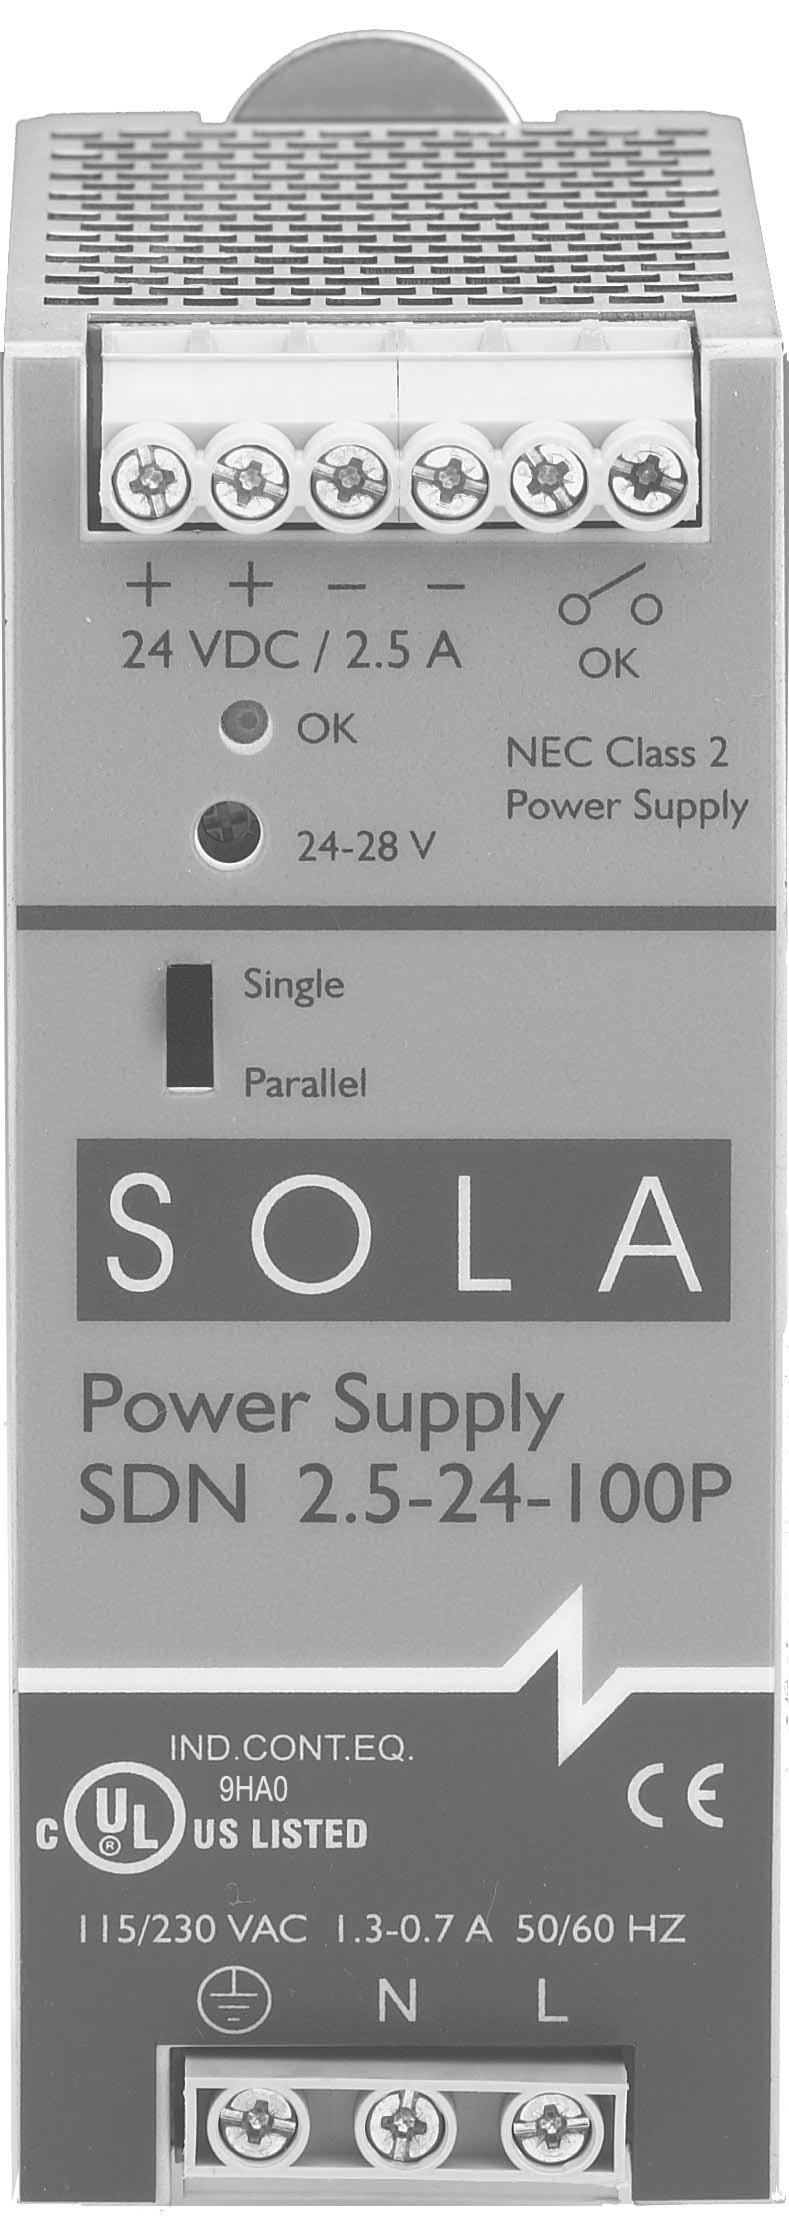 The Sola Difference Rugged metal pack ag ing Multiple output connections for ease of wiring multiple devices Strong all metal DIN con nec tor for horizontal or vertical mounting Large, heavy-duty